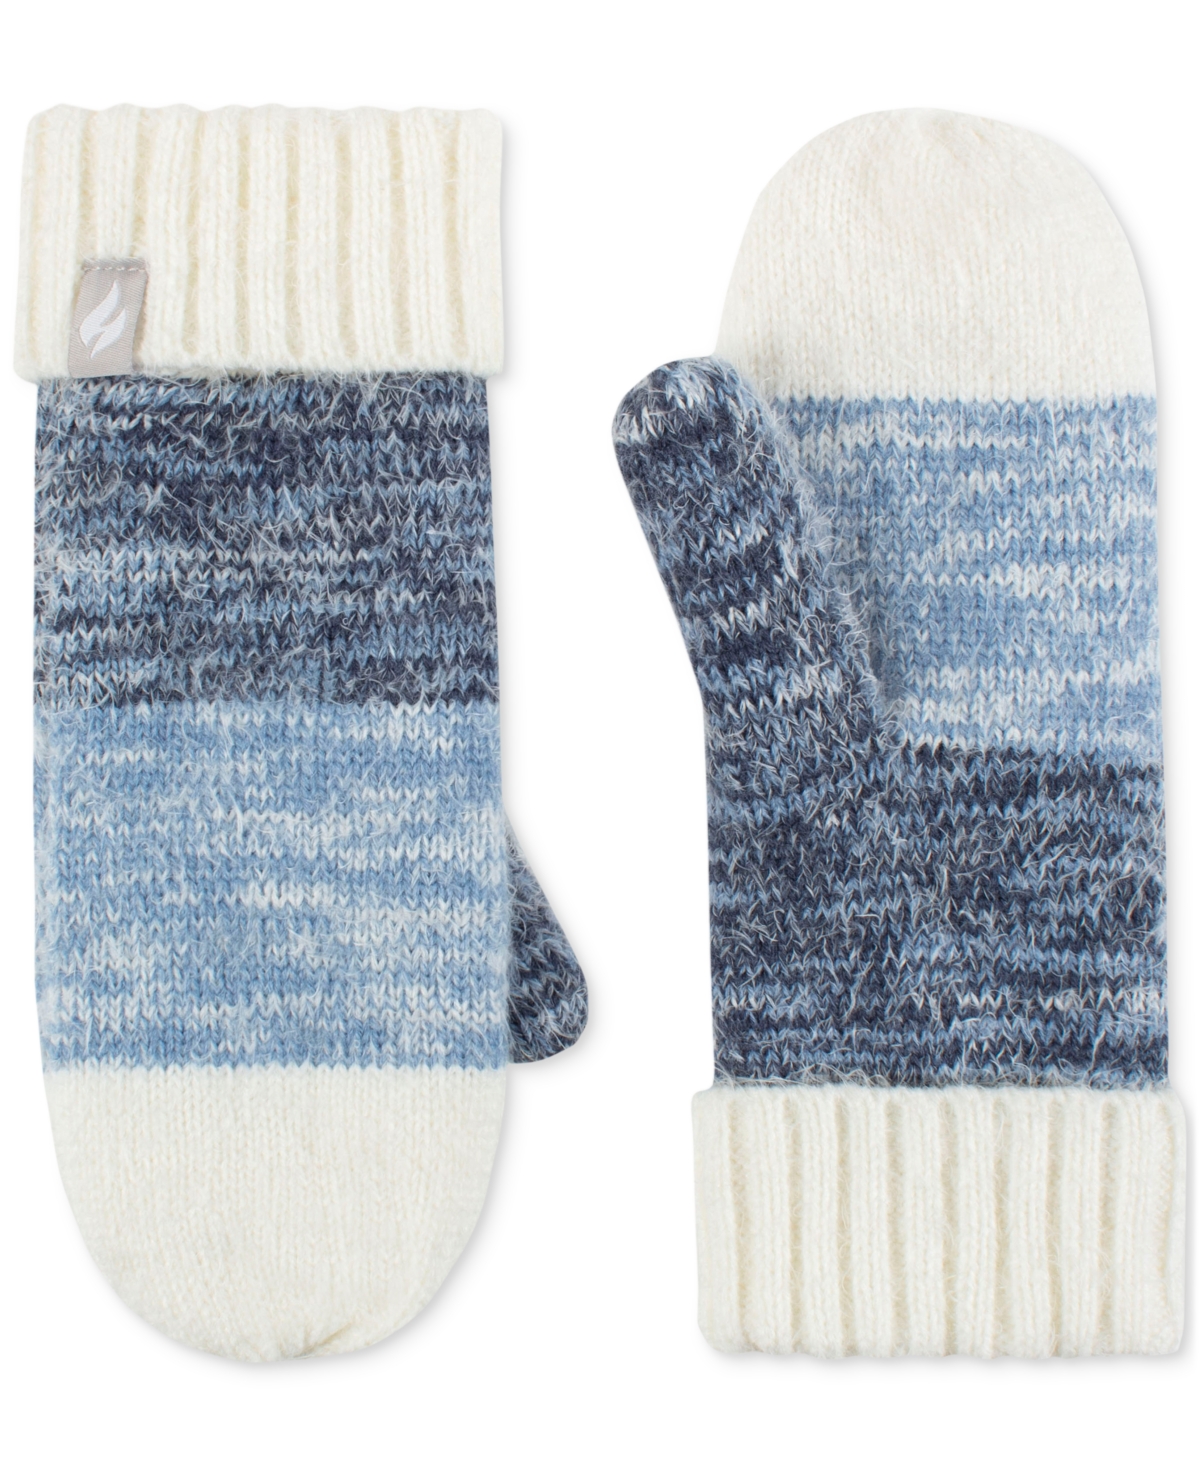 Heat Holders Sloane Feather Knit Mittens In Navy